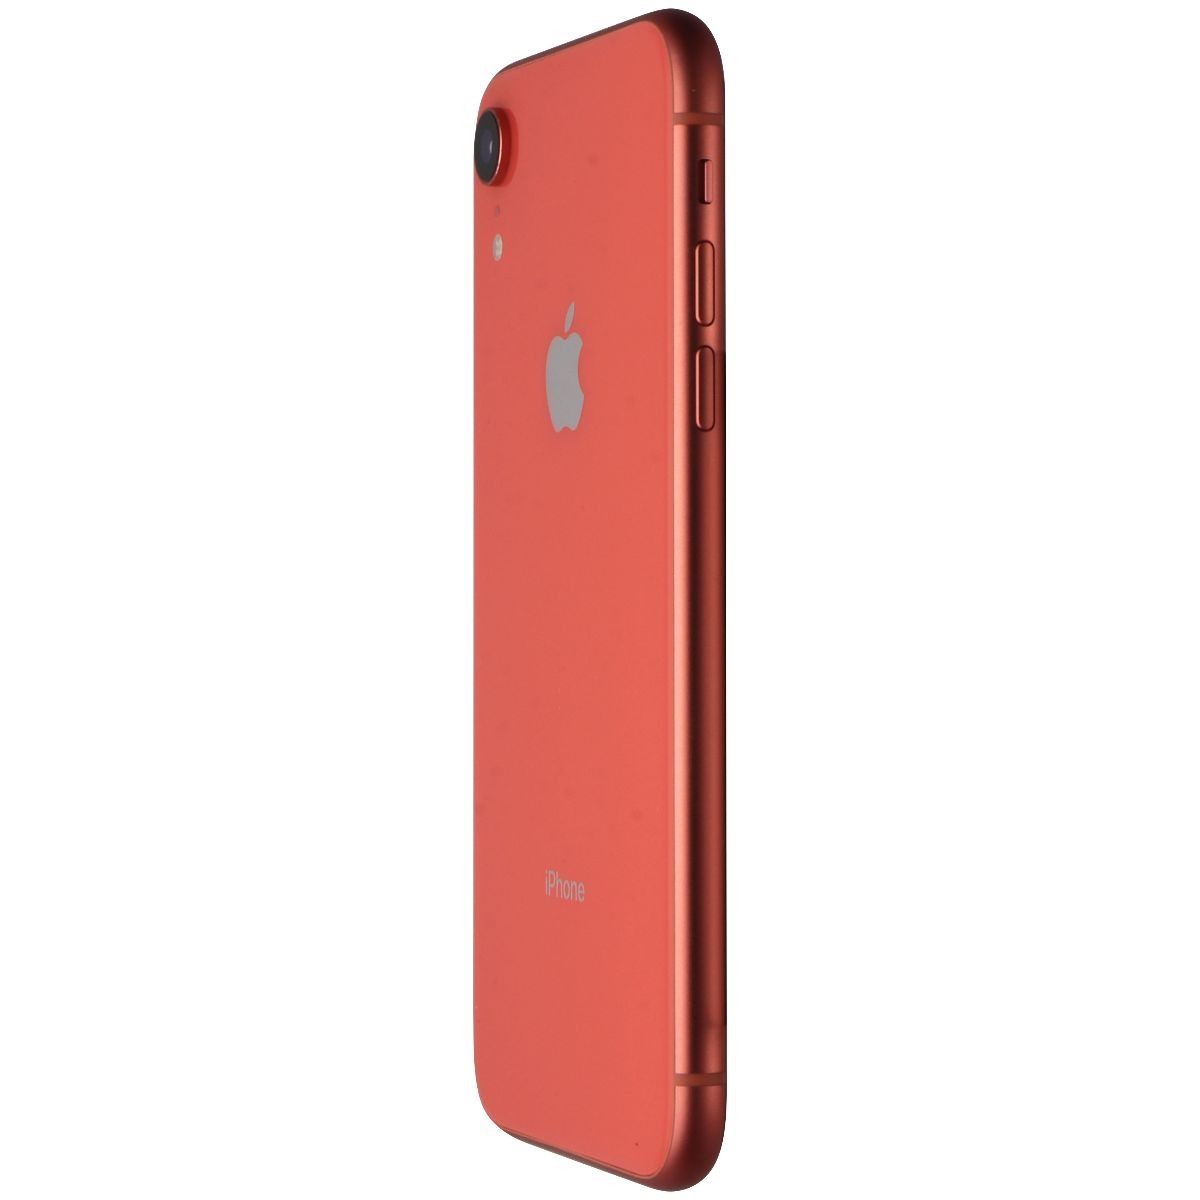 Apple iPhone XR (6.1-inch) (A1984) Unlocked - 64GB / Coral - Bad Face ID* Cell Phones & Smartphones Apple    - Simple Cell Bulk Wholesale Pricing - USA Seller